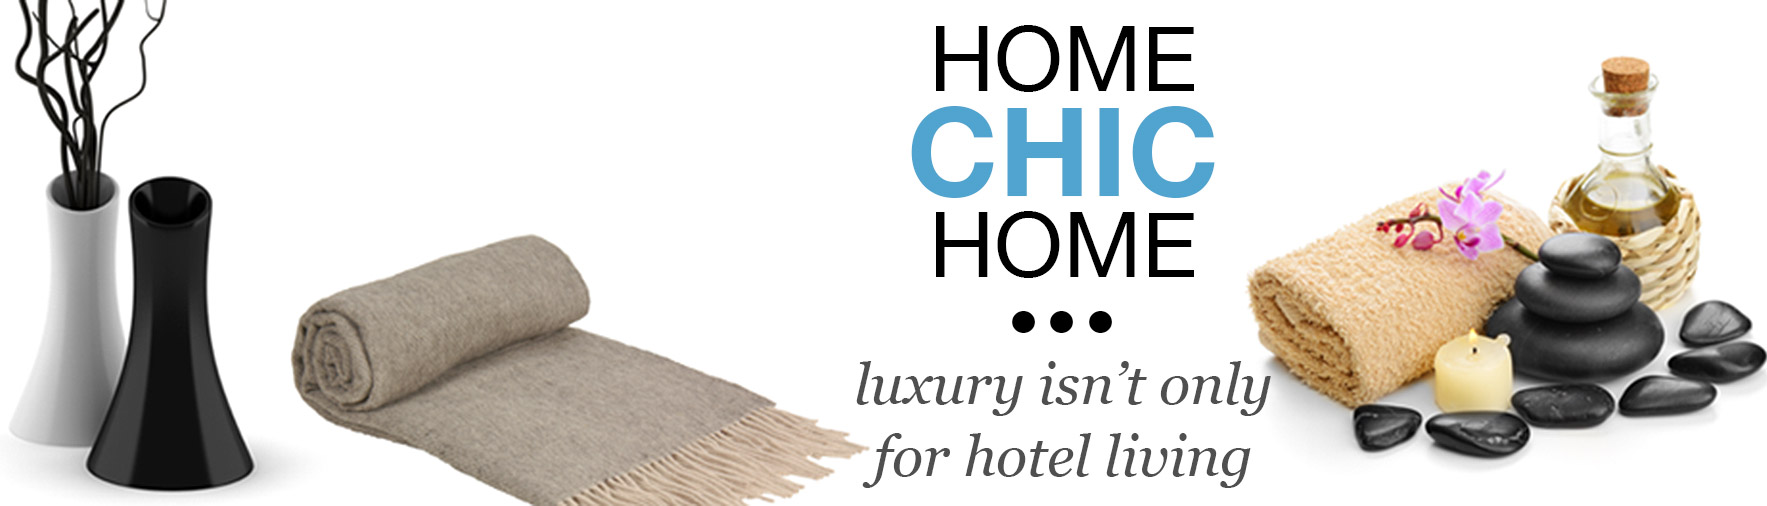 Home Chic Home - luxury isn't only for hotel living